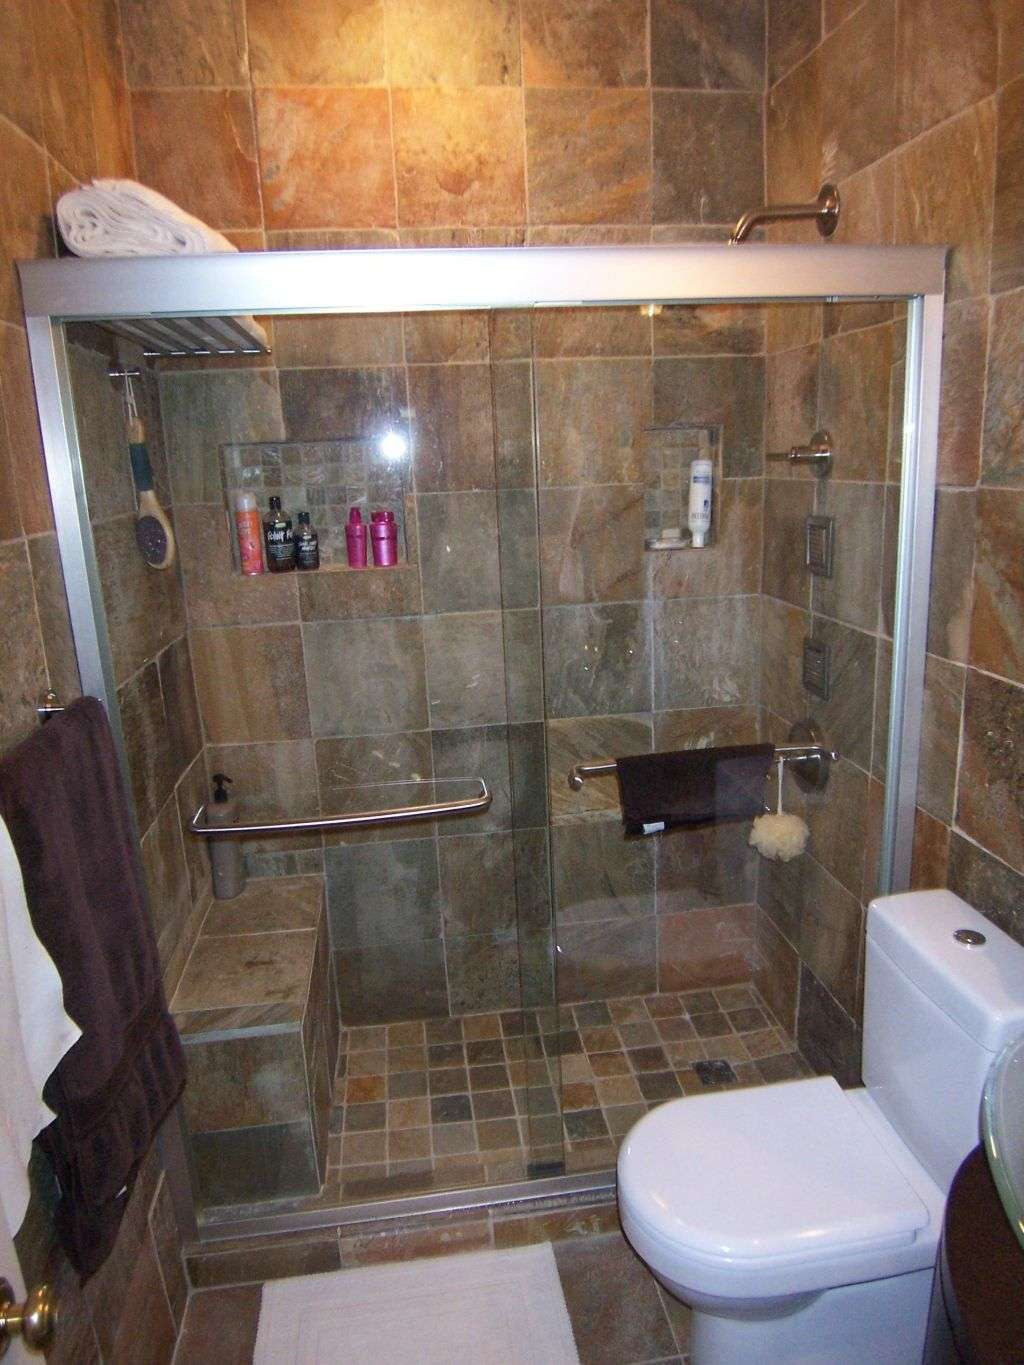 Shower Ideas For Small Bathroom
 15 Latest & Best Small Bathroom Designs for Small Spaces